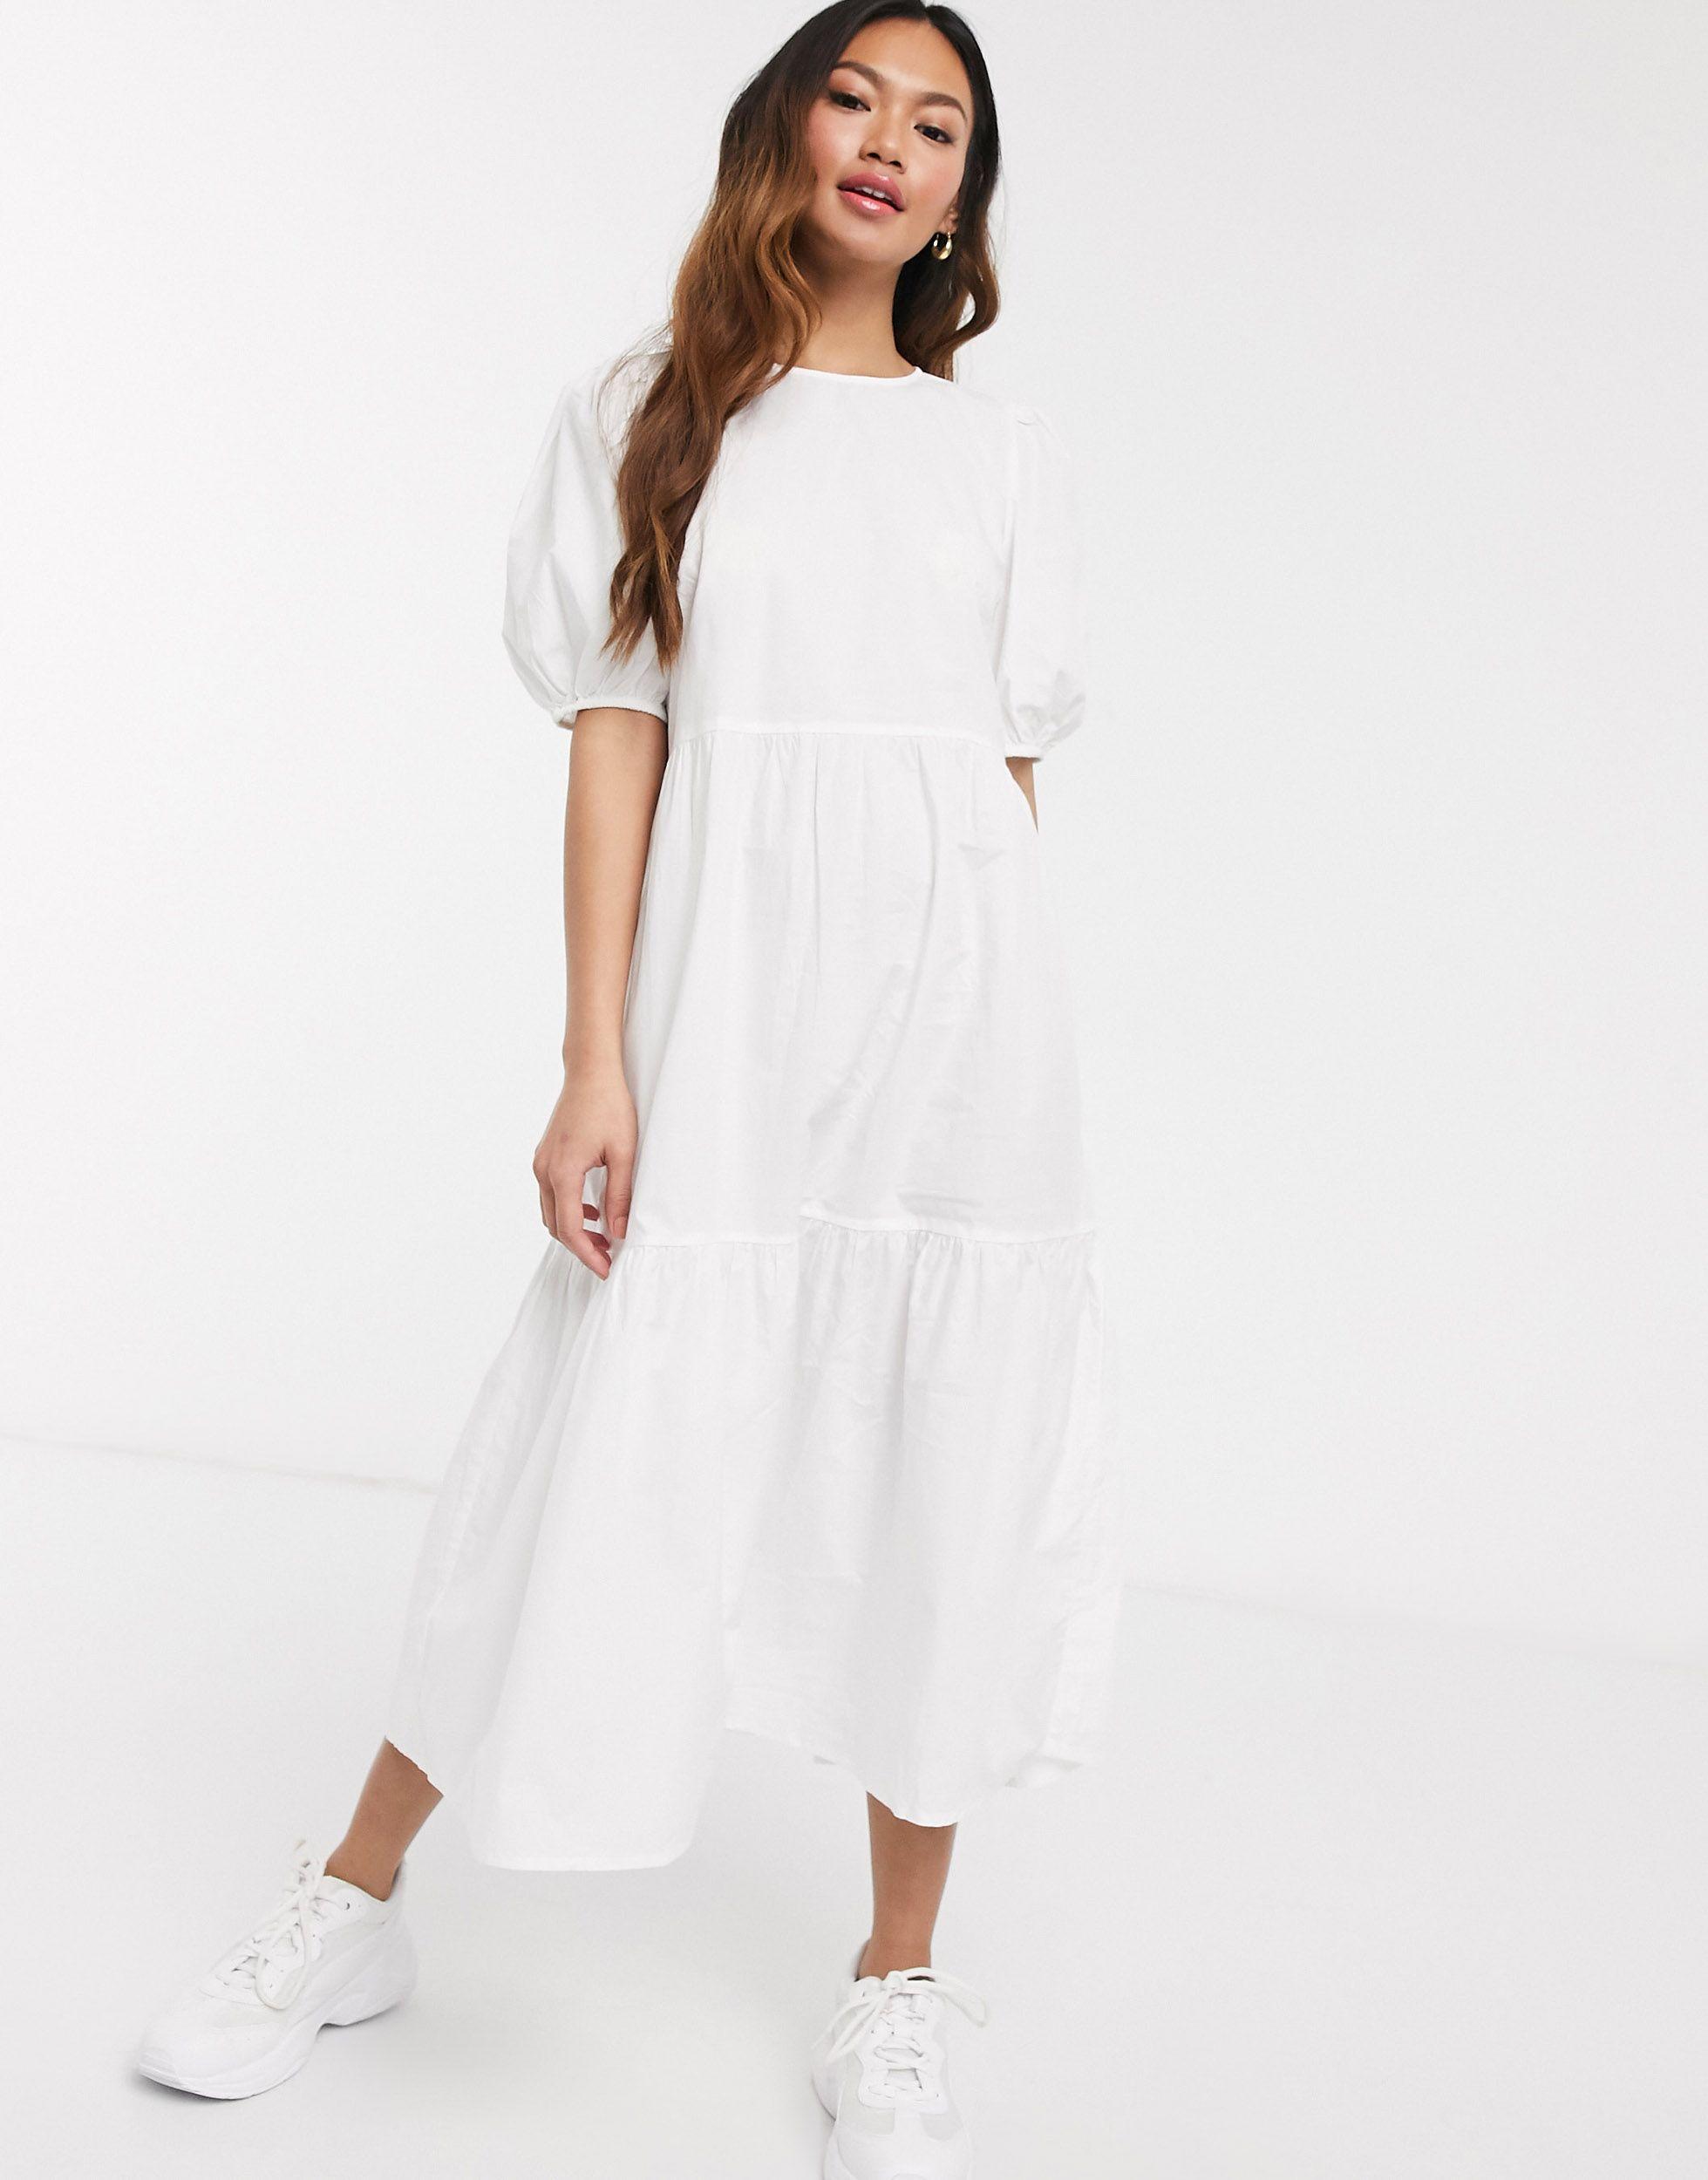 White Smocked Dress with sleeves